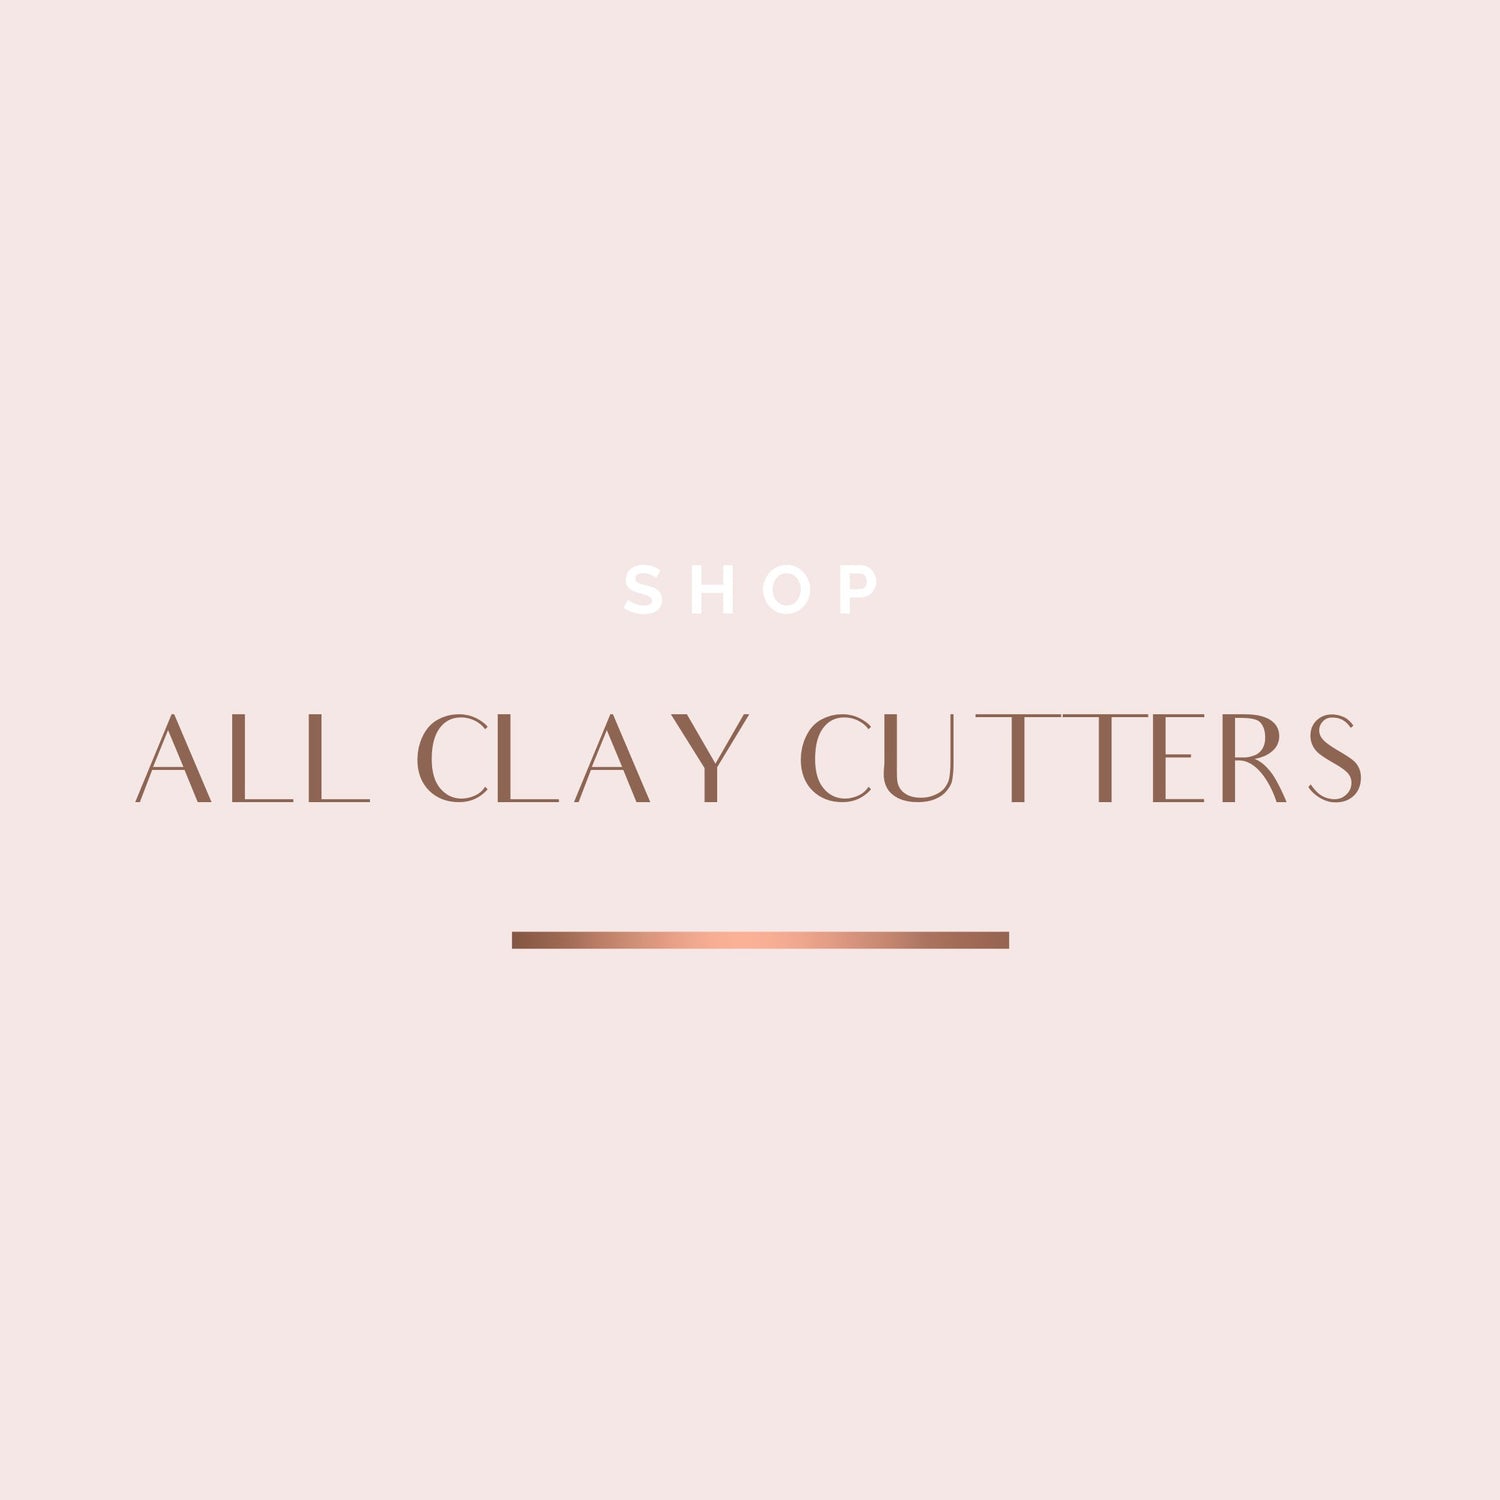 ALL CLAY CUTTERS